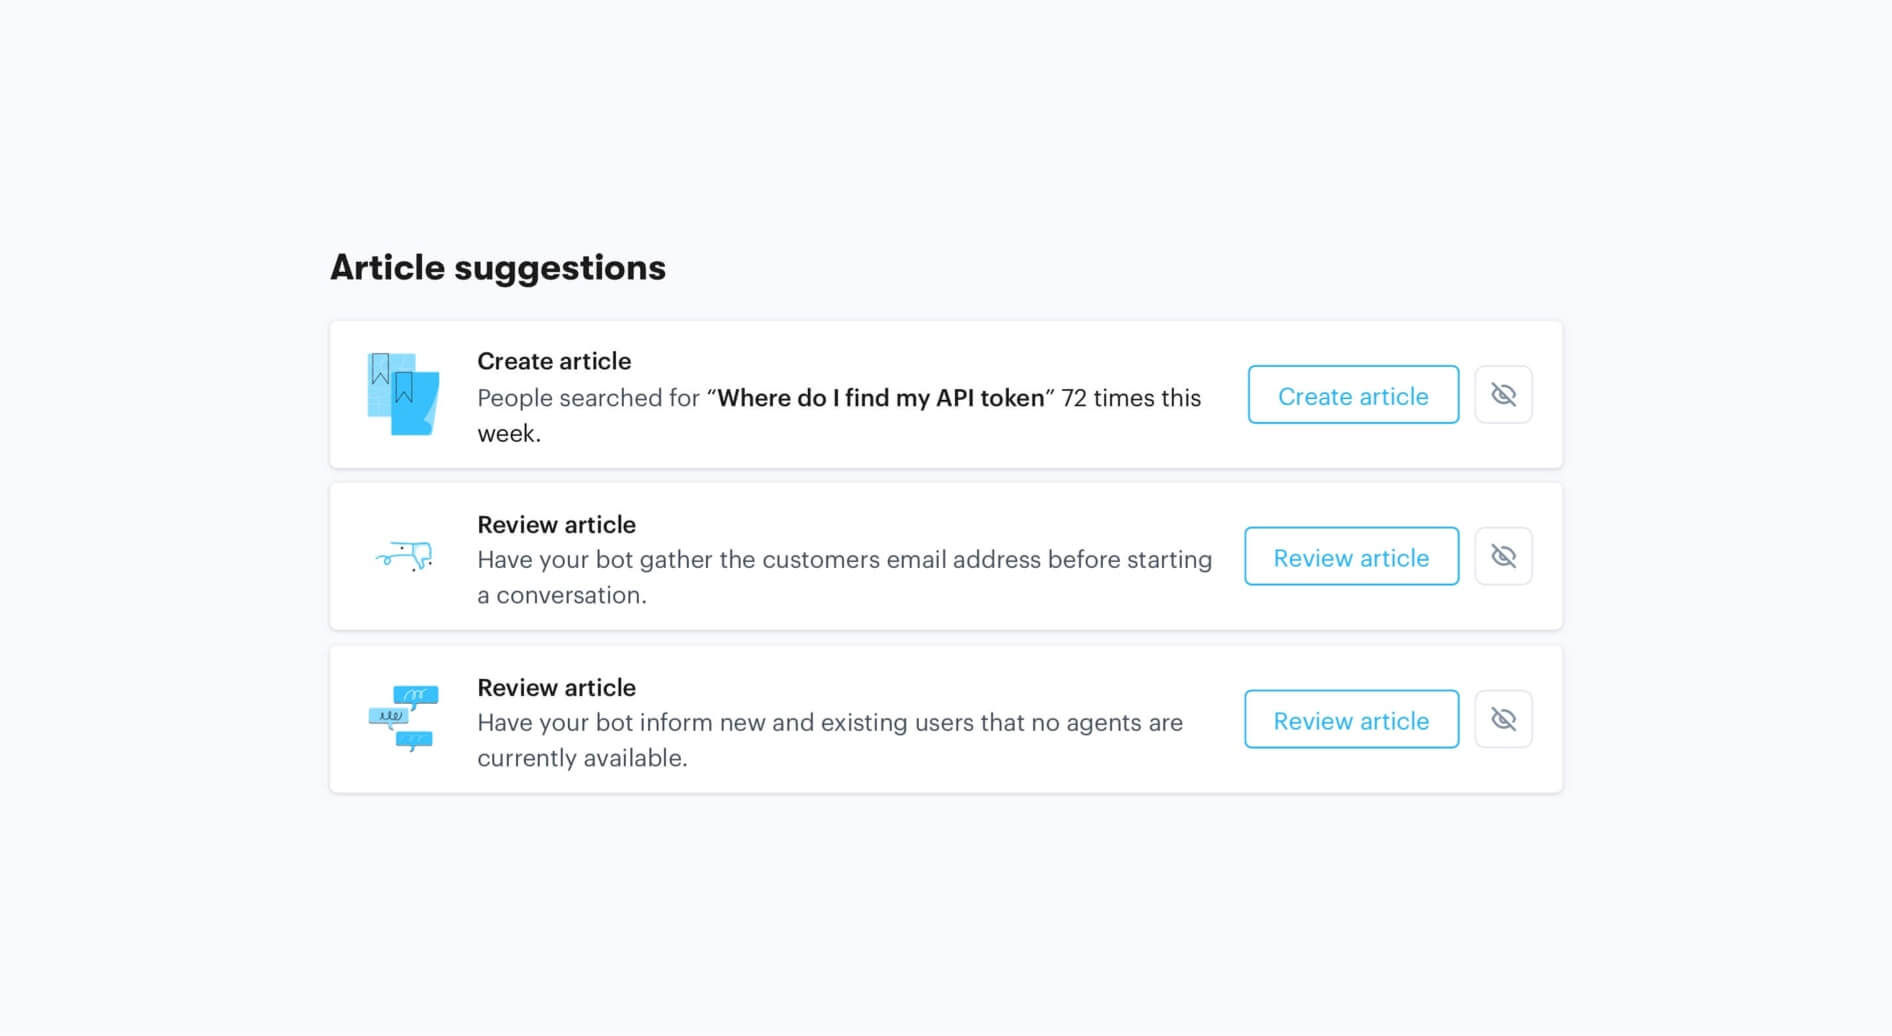 Article suggestions - Our AI-driven system suggests the best articles to create to give customers the help they need.